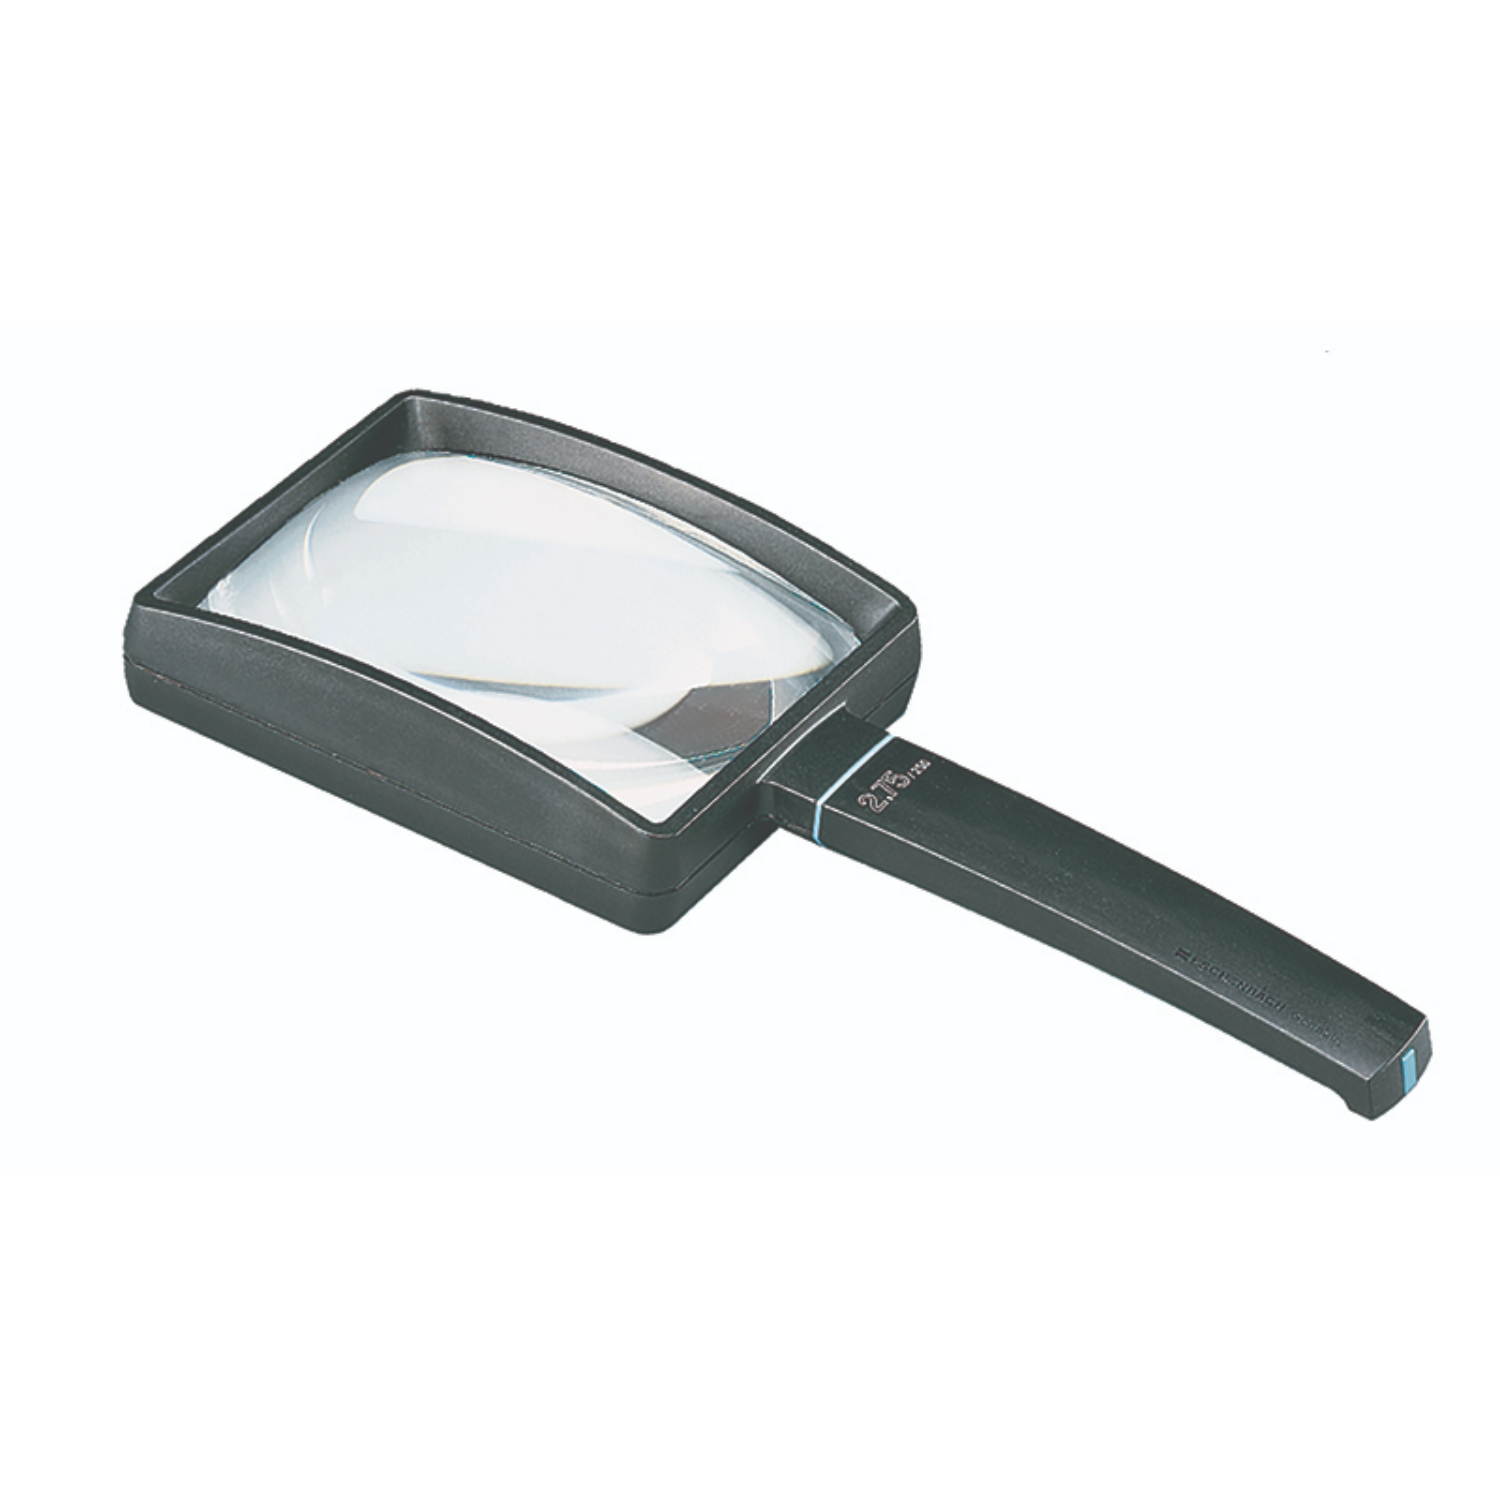 Magnifying glasses MaxDetail  Magnifying spectacles and